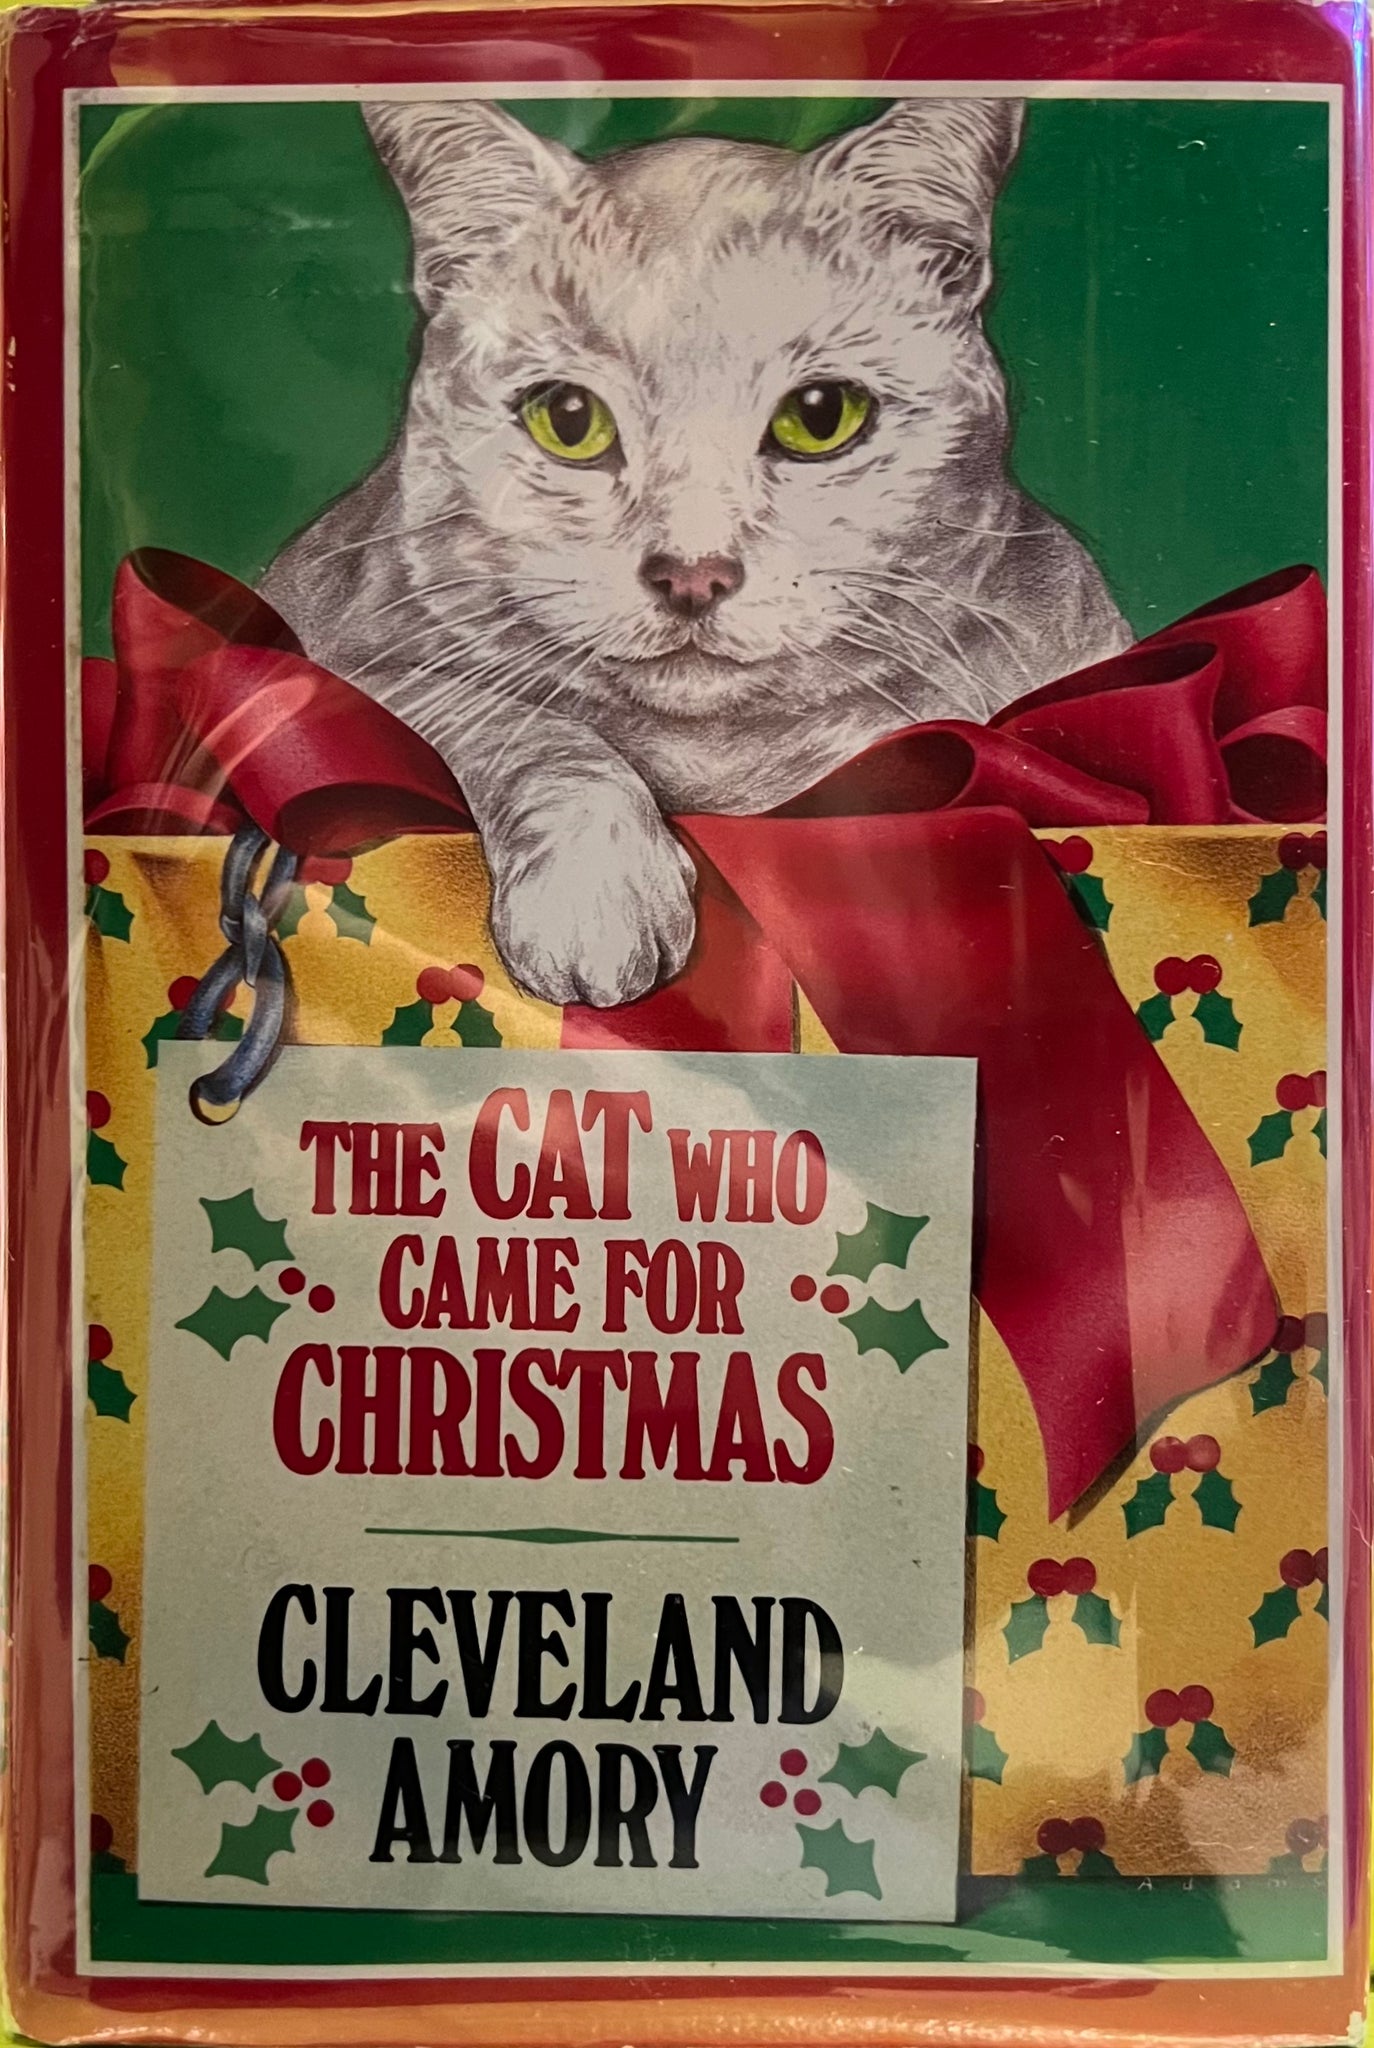 The Cat Who Came for Christmas, Cleveland Amory